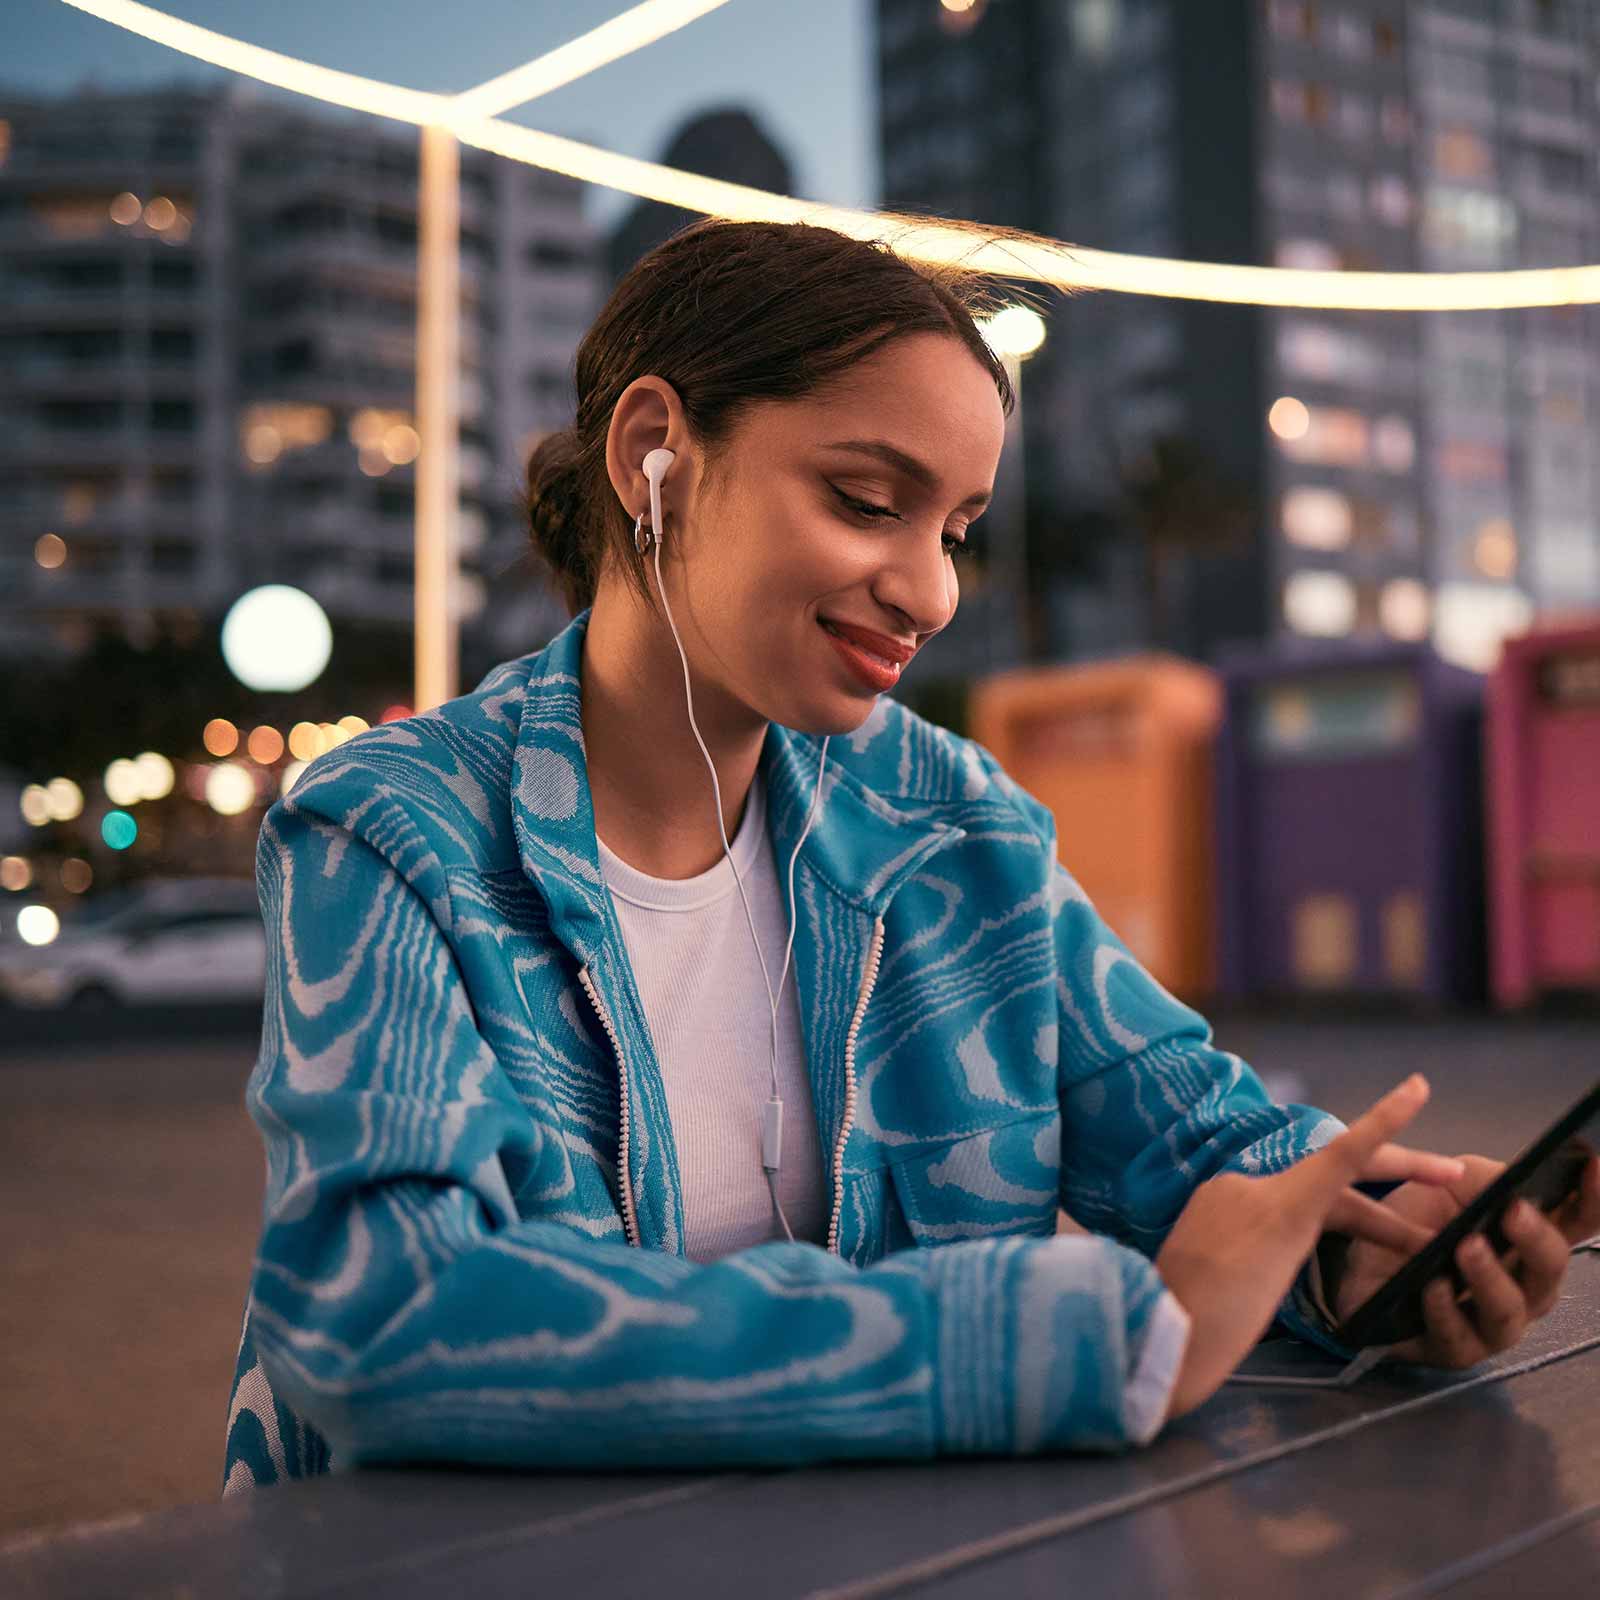 Woman looking wearing headphones using a phone sitting outside at night